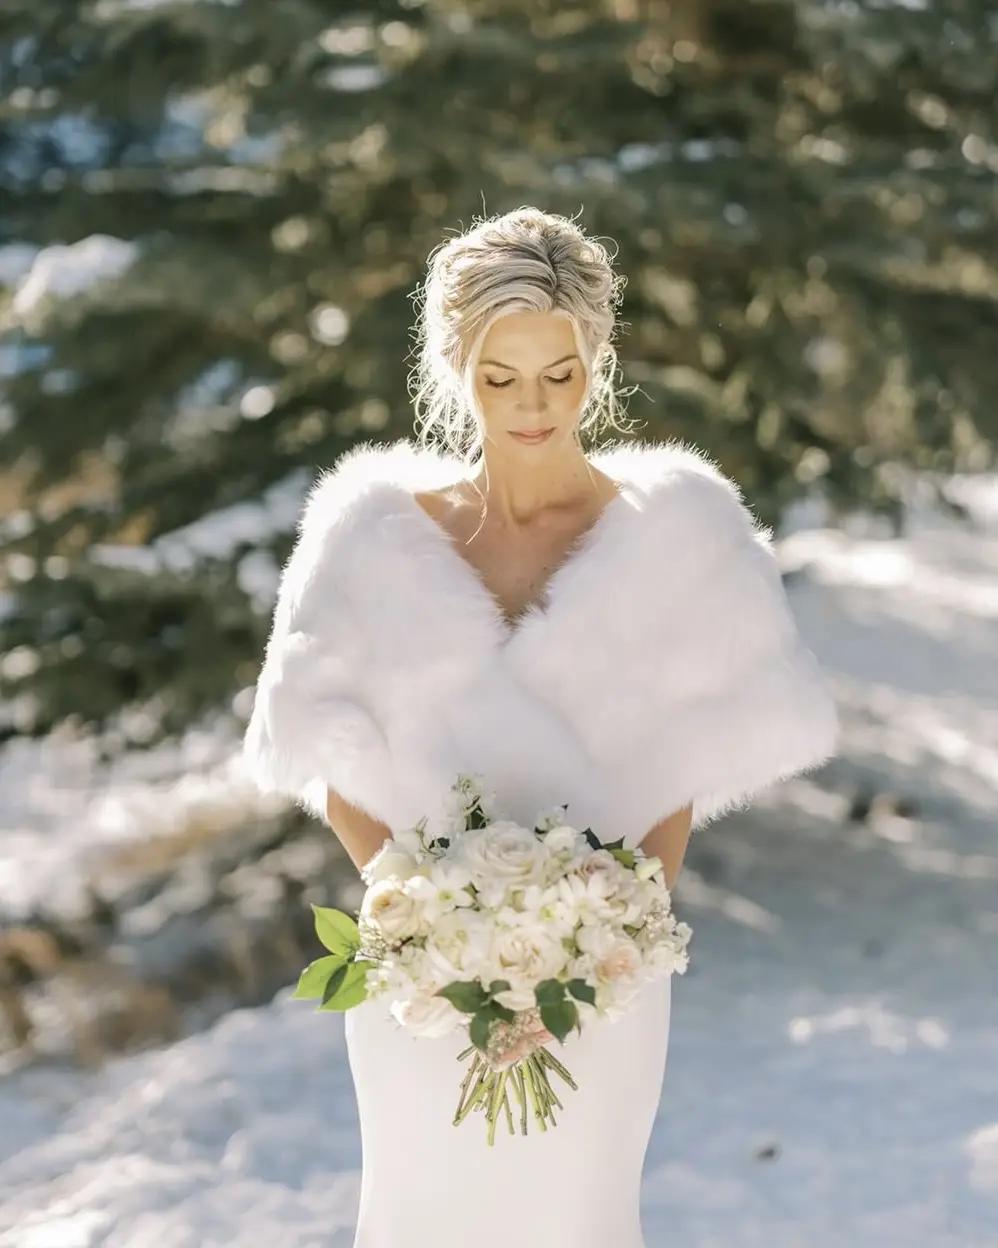 Your Winter Wedding Beauty Guide Image